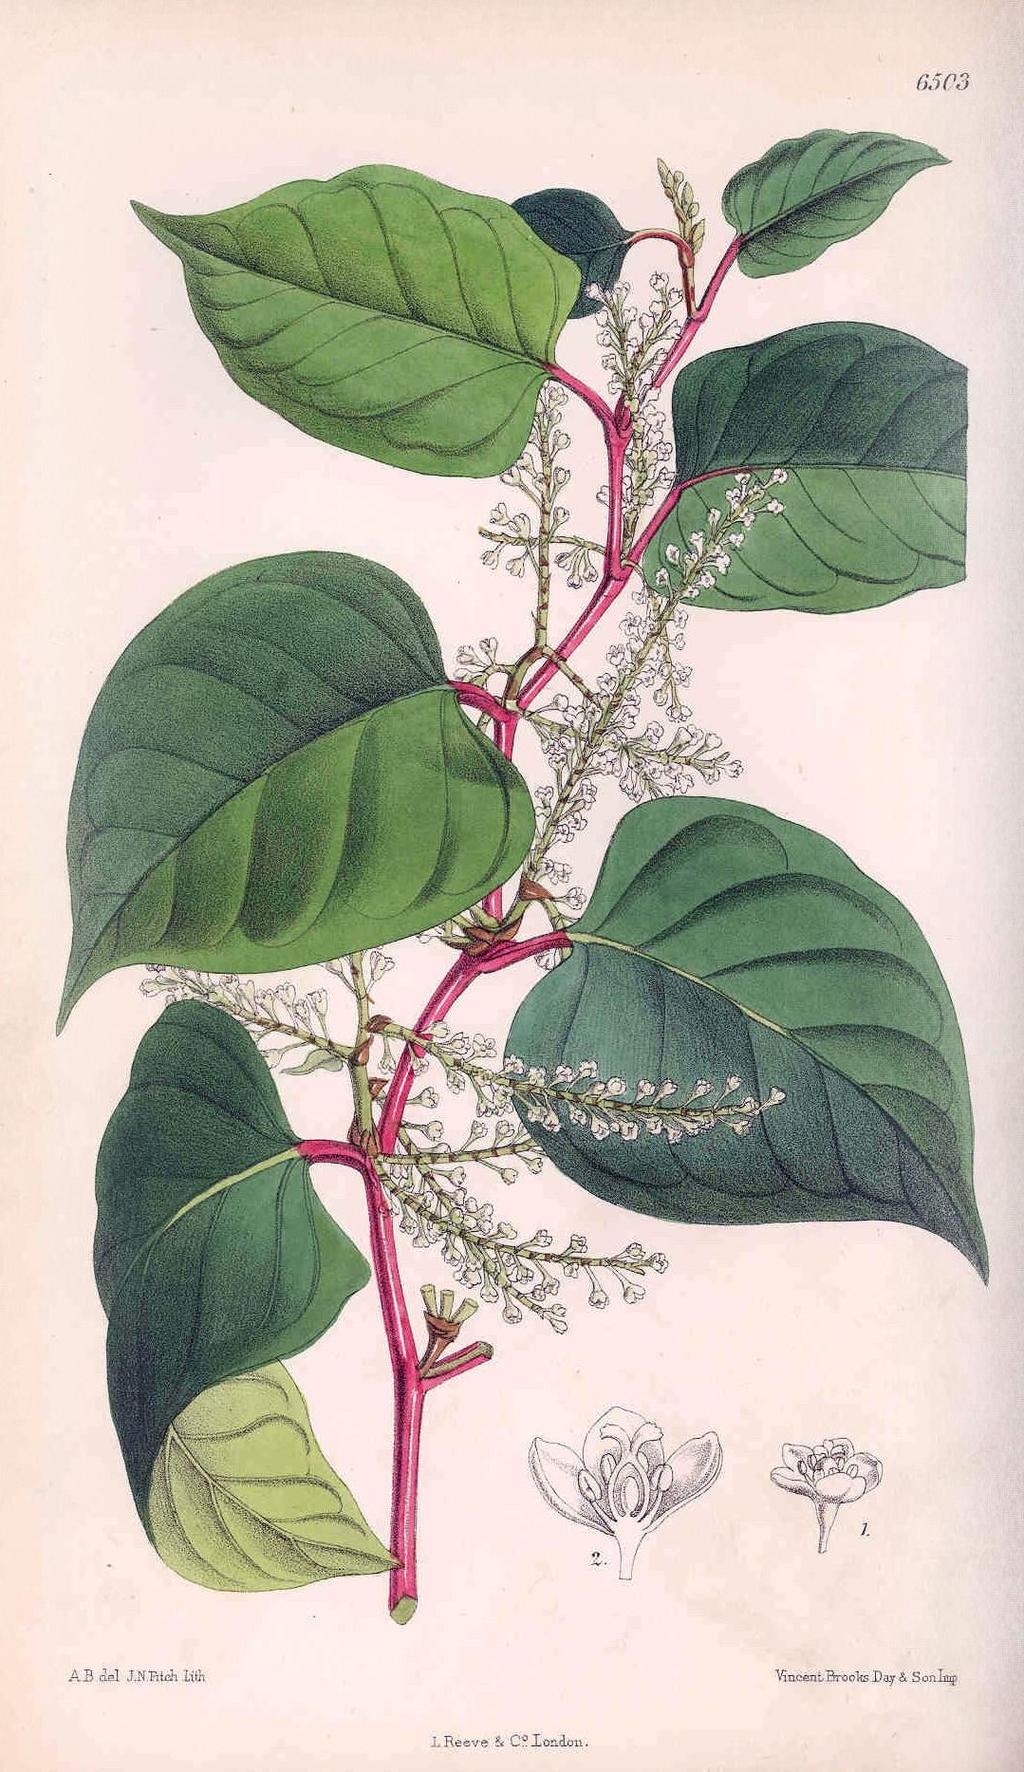 Contemporary engraving by De Vriese of Von Siebold s plant showing all the features of the British Japanese Knotweed